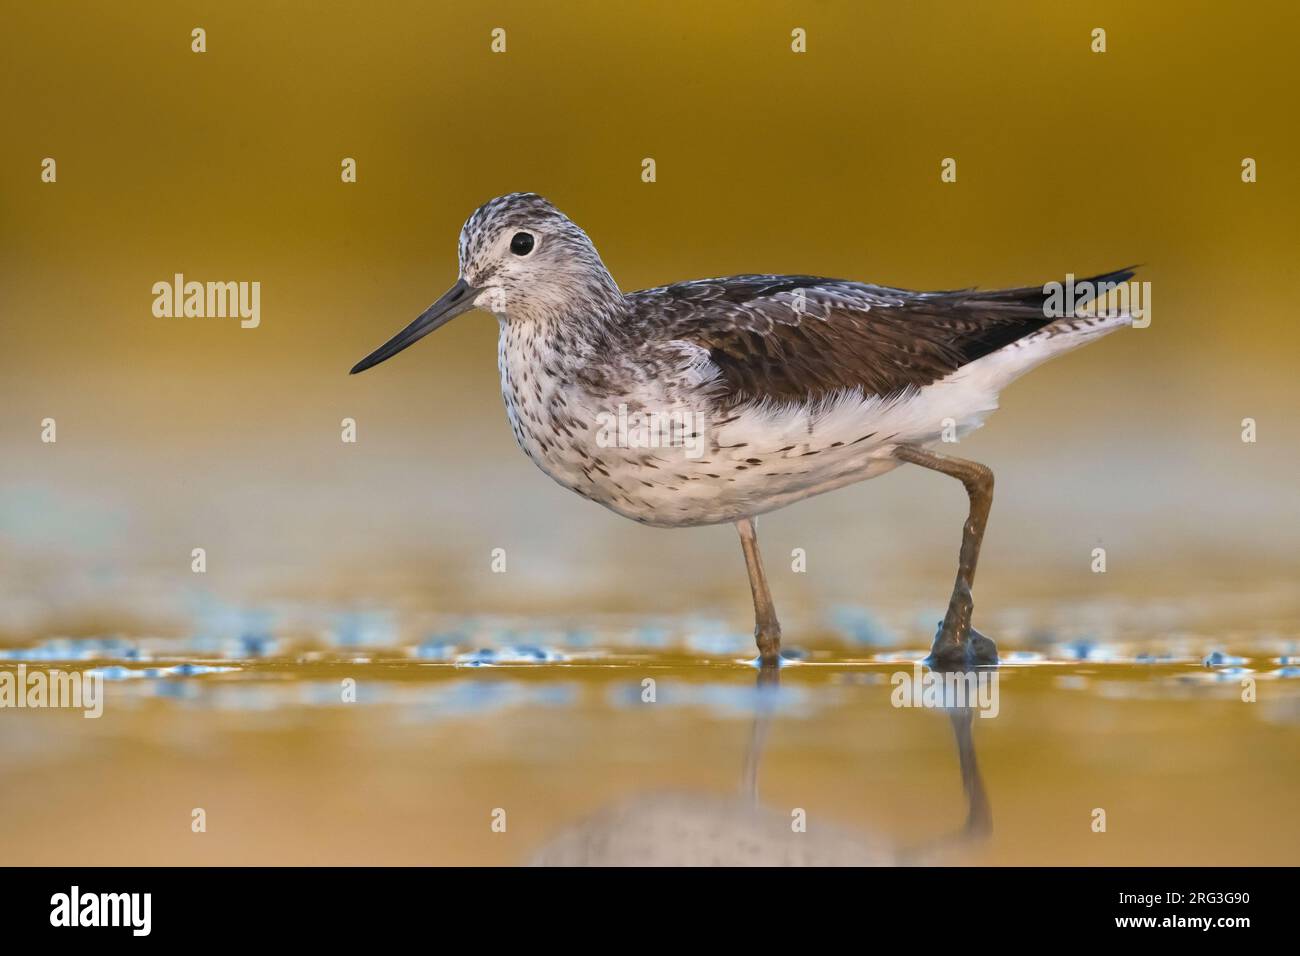 Common Greenshank (Tringa nebularia) standing in shallow freshwater pool during early autumn migration in Italy. Stock Photo